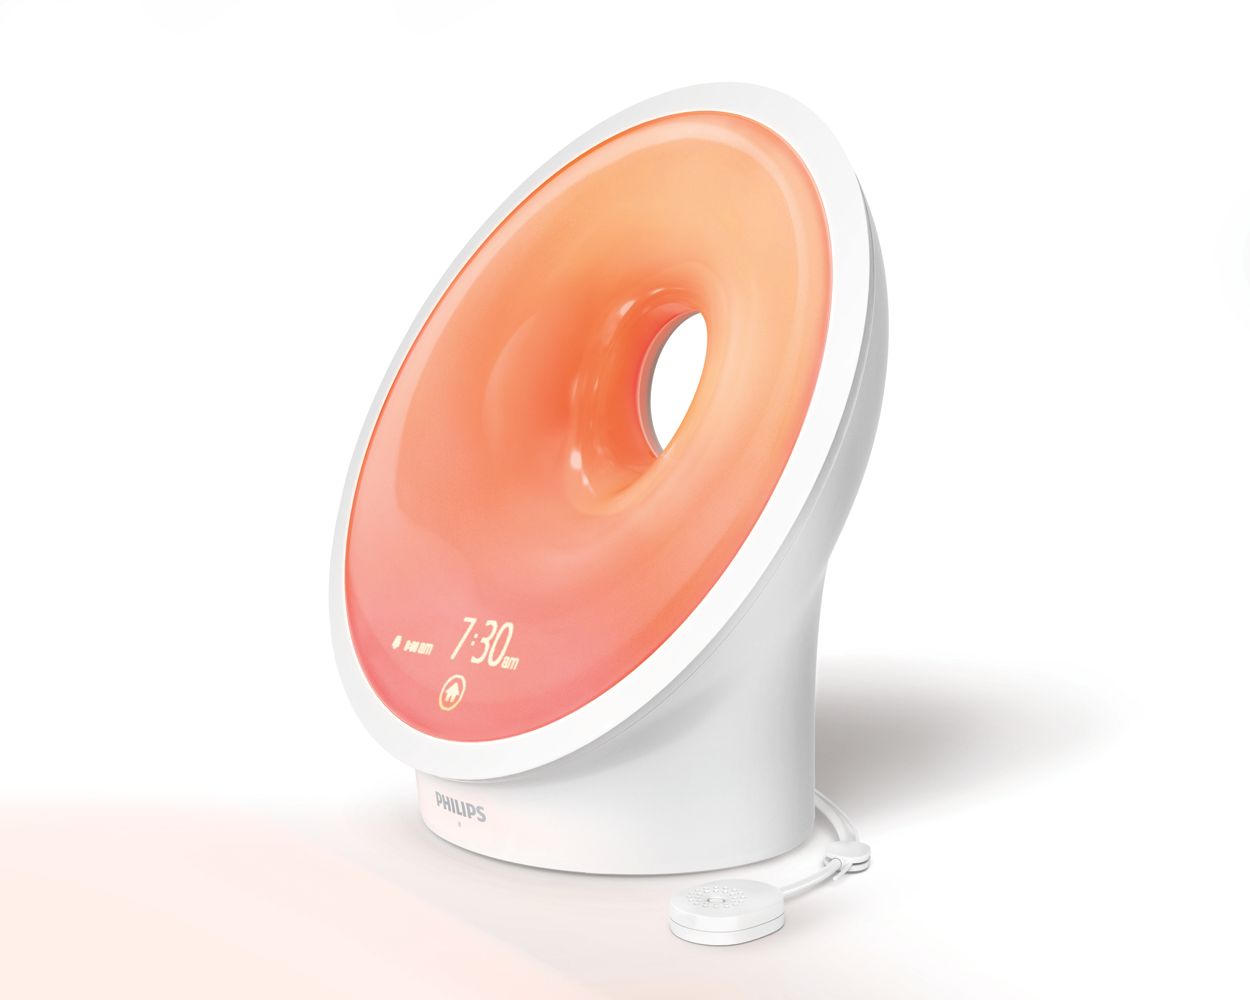 Eventyrer areal Australsk person SmartSleep Connected Sleep and Wake-Up Light HF3670/60 | Philips